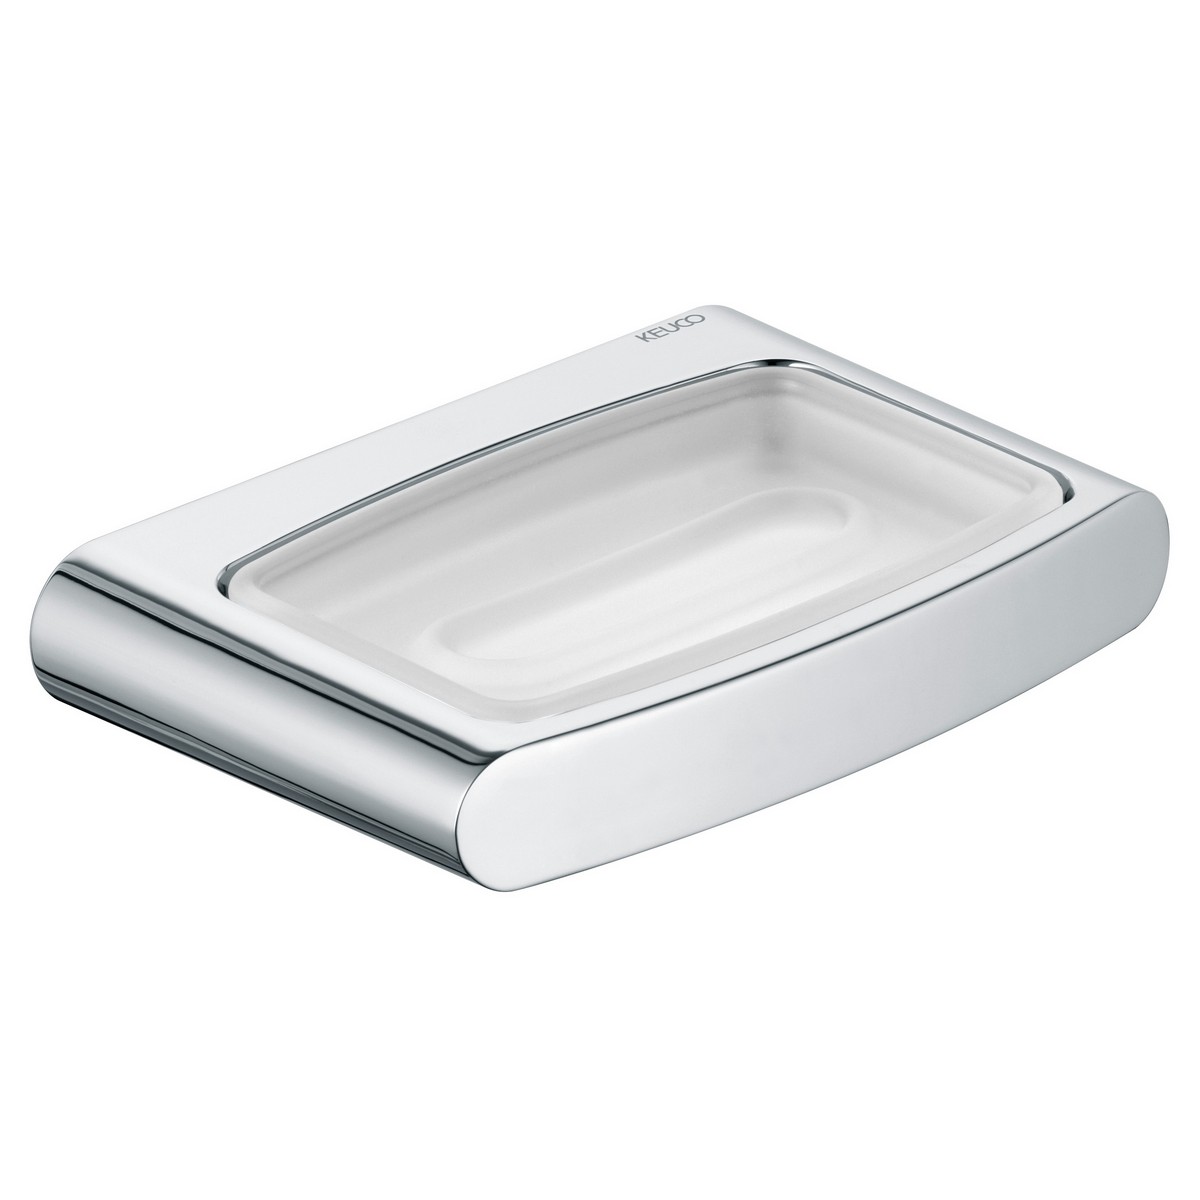 KEUCO 11655019000 ELEGANCE 5 1/2 INCH WALL MOUNTED SOAP HOLDER IN POLISHED CHROME